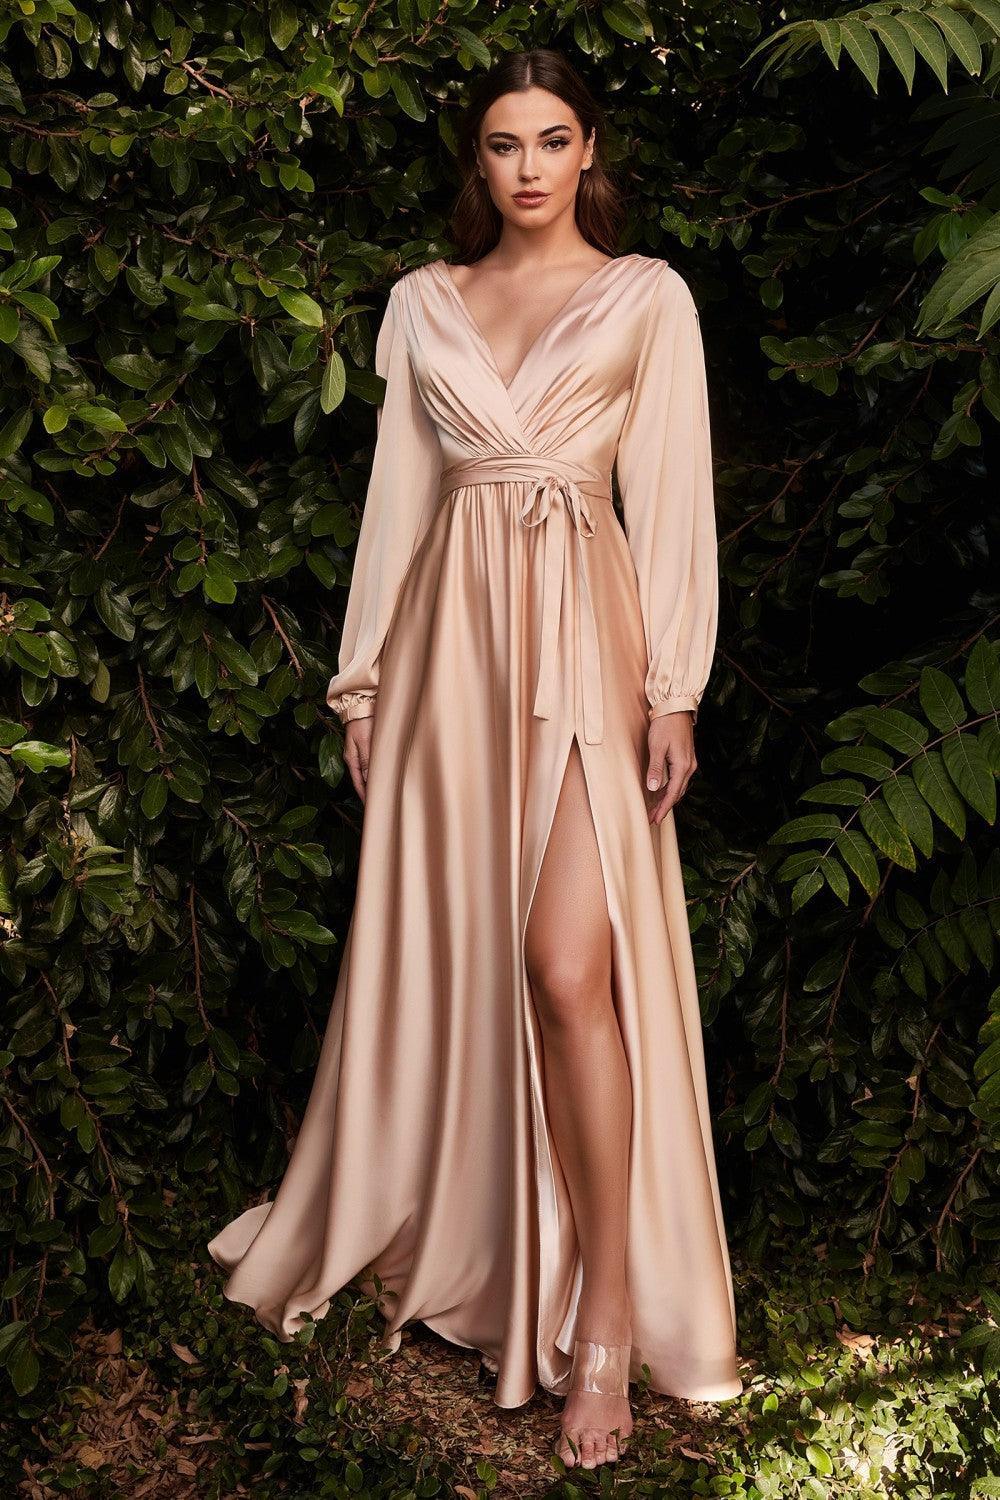 Formal Long Sleeve Dress Evening Gown Nude